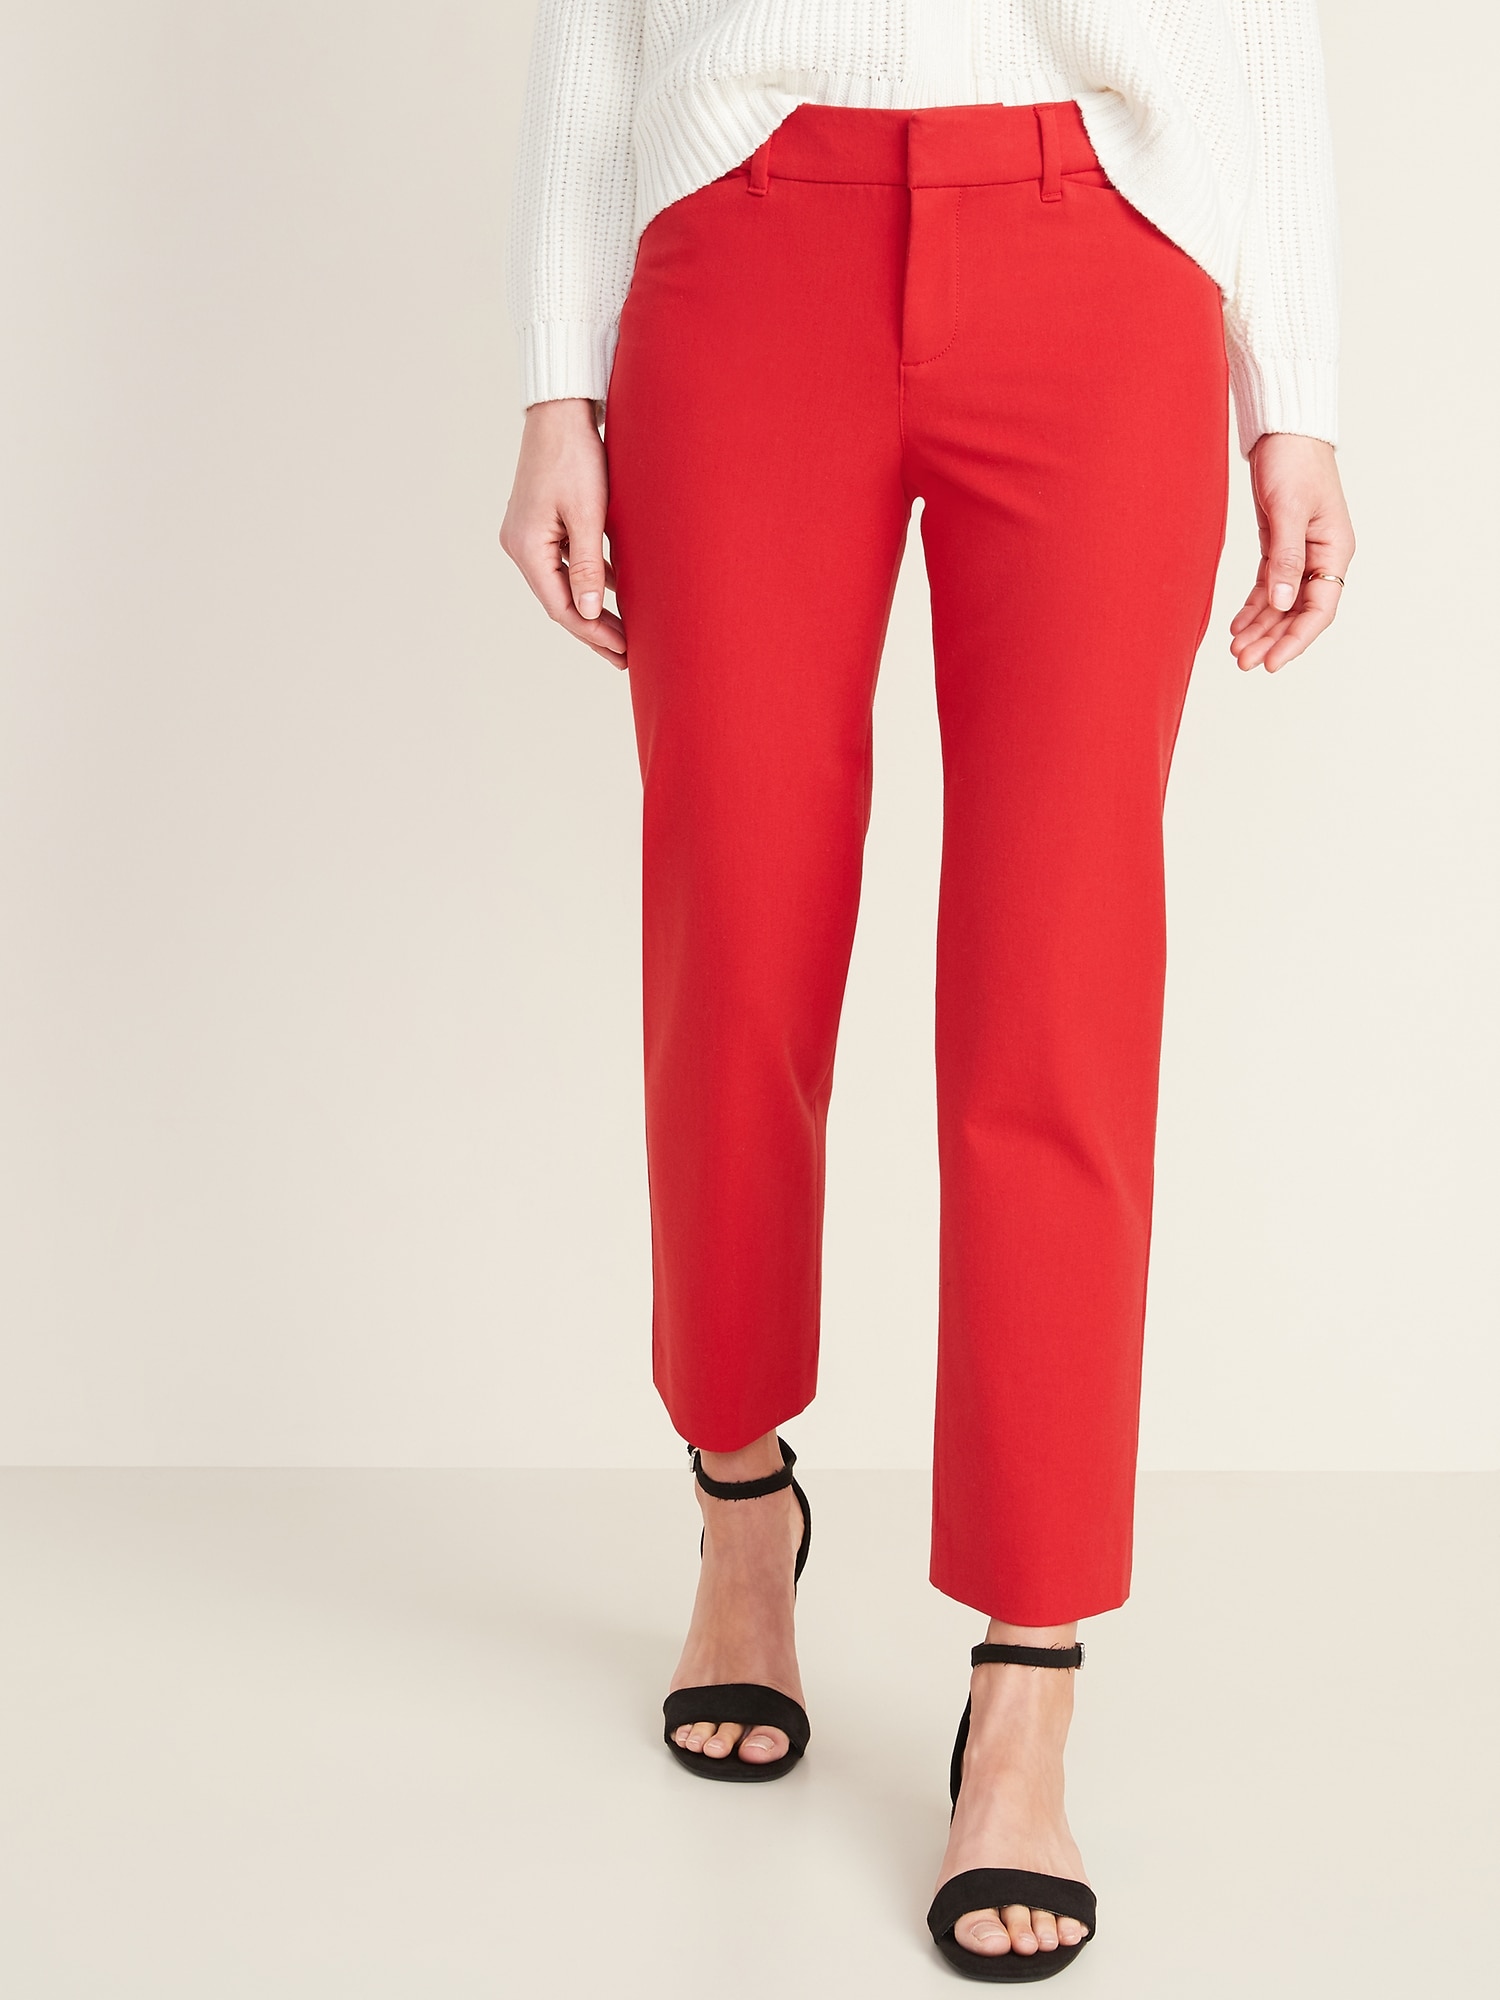 All-New Mid-Rise Pixie Straight-Leg Ankle Pants for Women